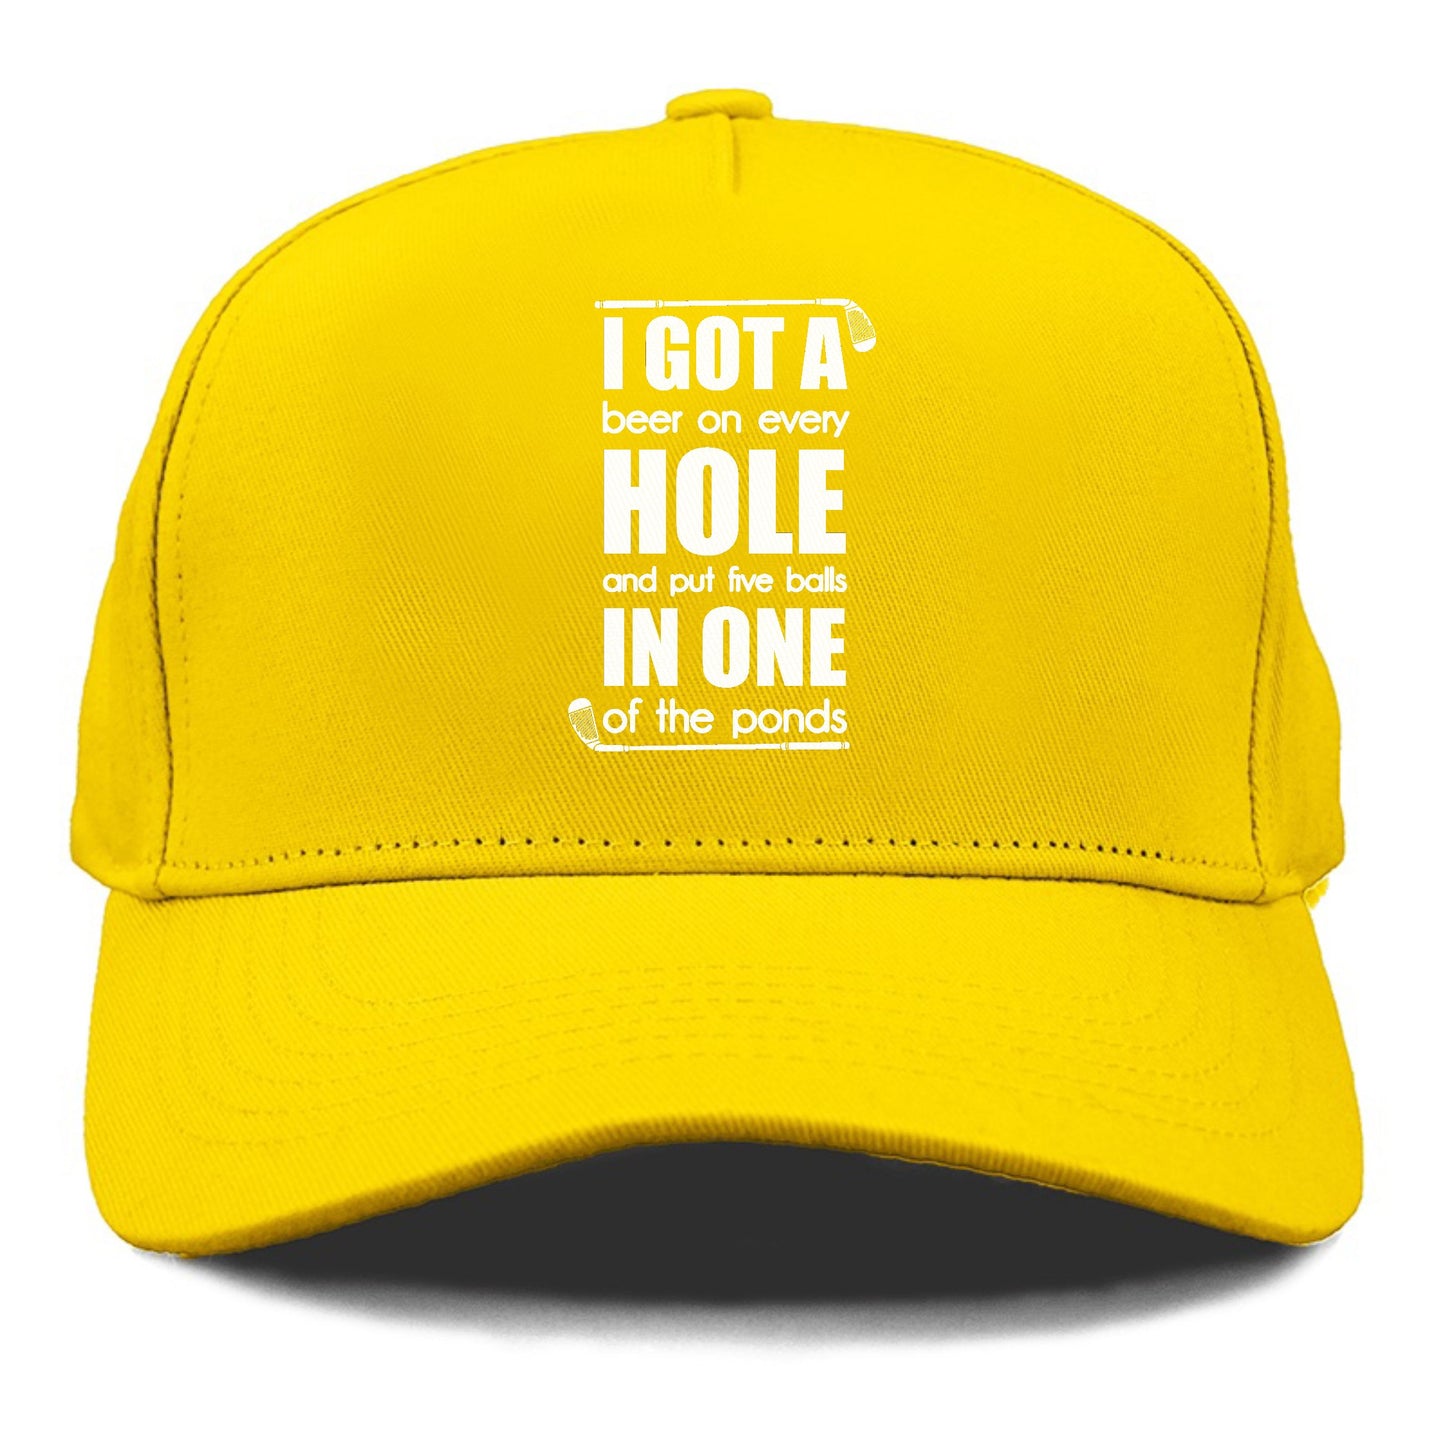 I GOT A beer on every HOLE and put five balls IN ONE of the ponds Hat